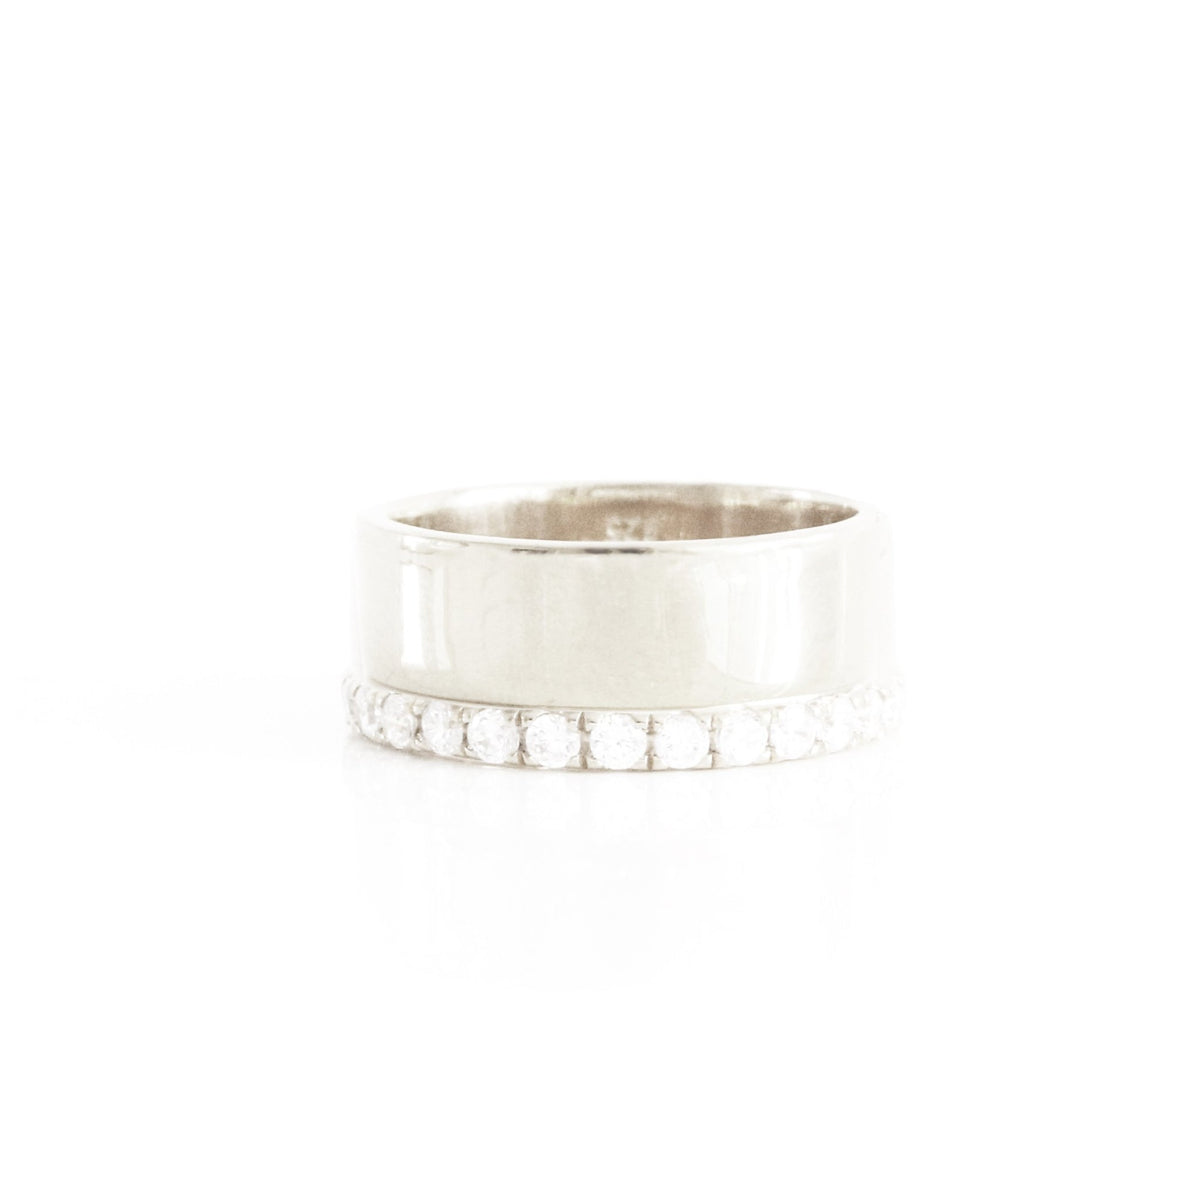 LOVE ETERNITY CIGAR BAND - CUBIC ZIRCONIA &amp; SILVER - SO PRETTY CARA COTTER